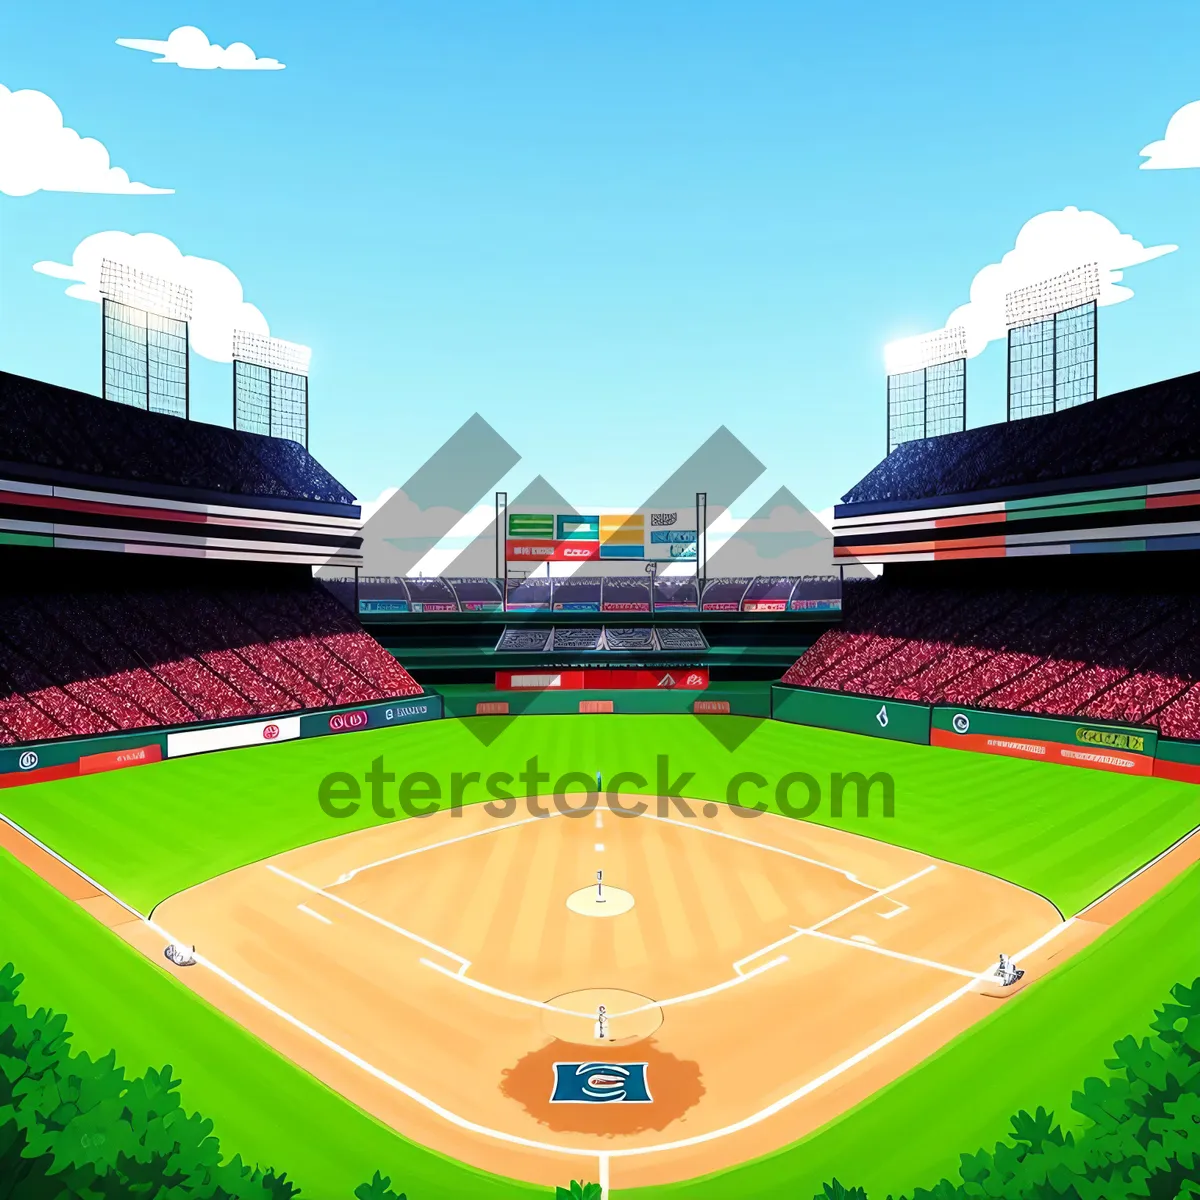 Picture of Summer Sports Facility: Baseball Stadium on Lush Green Grass